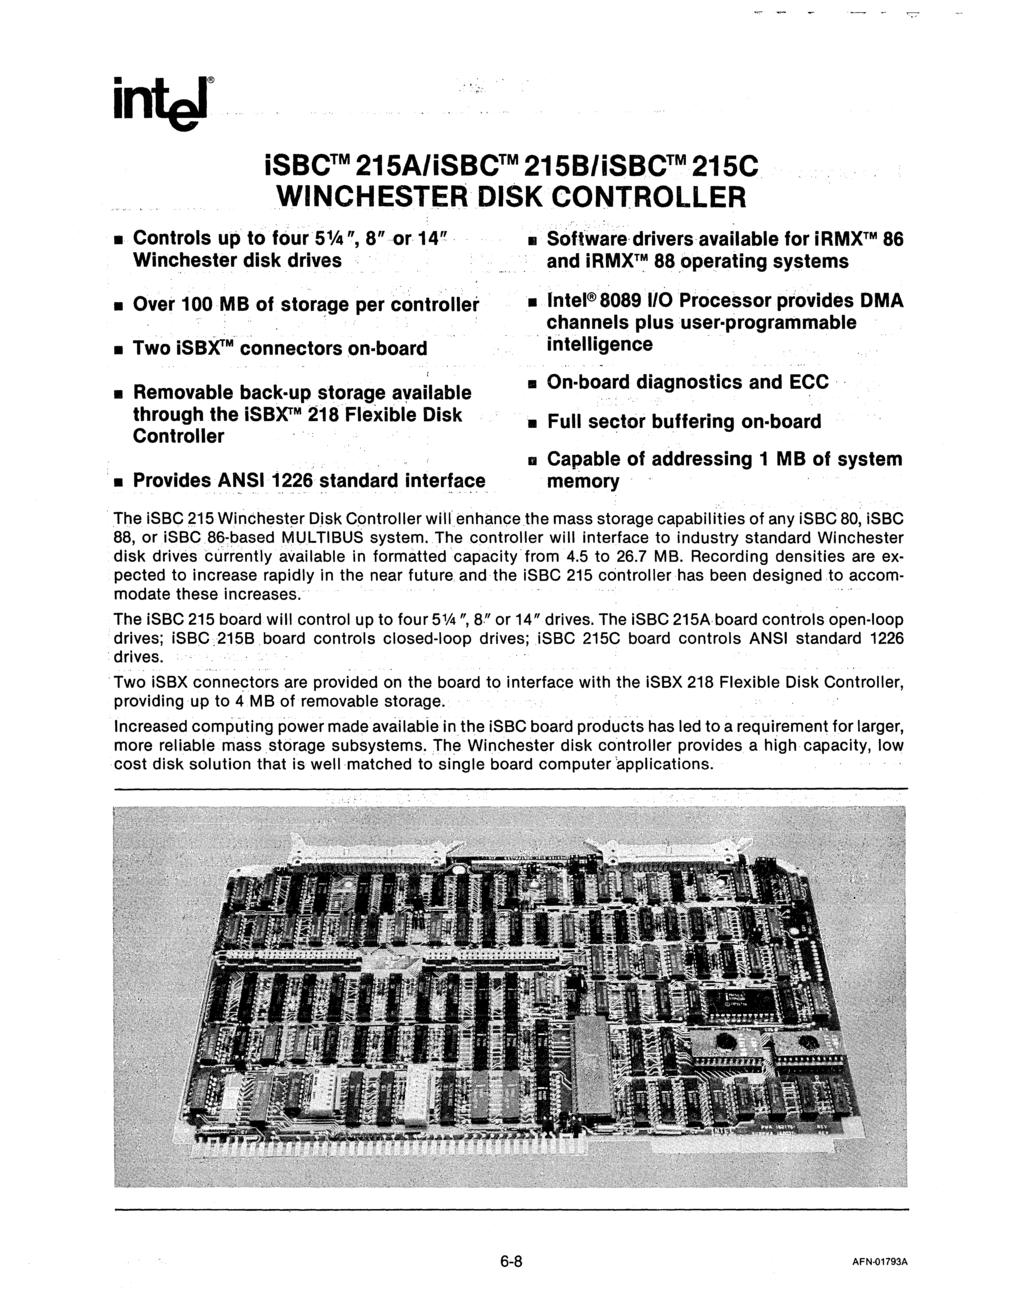 isbc 215AliSBC 215BliSBC 215C WNCHESTER DSK CONTROllER Controls up to four 51fi1", 8" or 14" Winchester disk drives Over 100MB of storage per controller Two isbxtm connectors on-board Removable